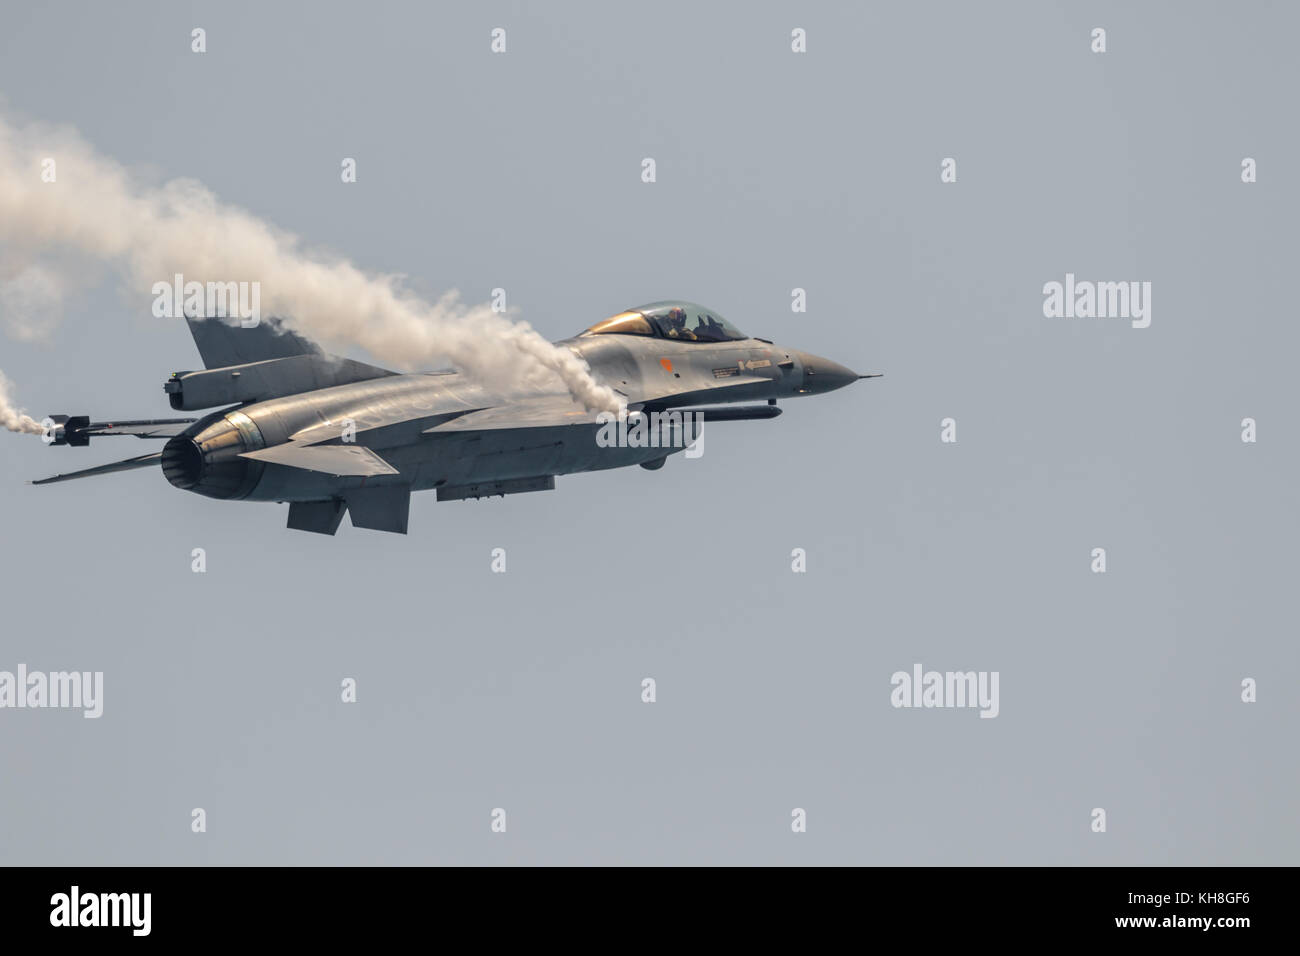 TORRE DEL MAR, MALAGA, SPAIN-JUL 28: Aircraft F-16 Belgian solo display taking part in a exhibition on the 2nd airshow of Torre del Mar on July 28, 20 Stock Photo